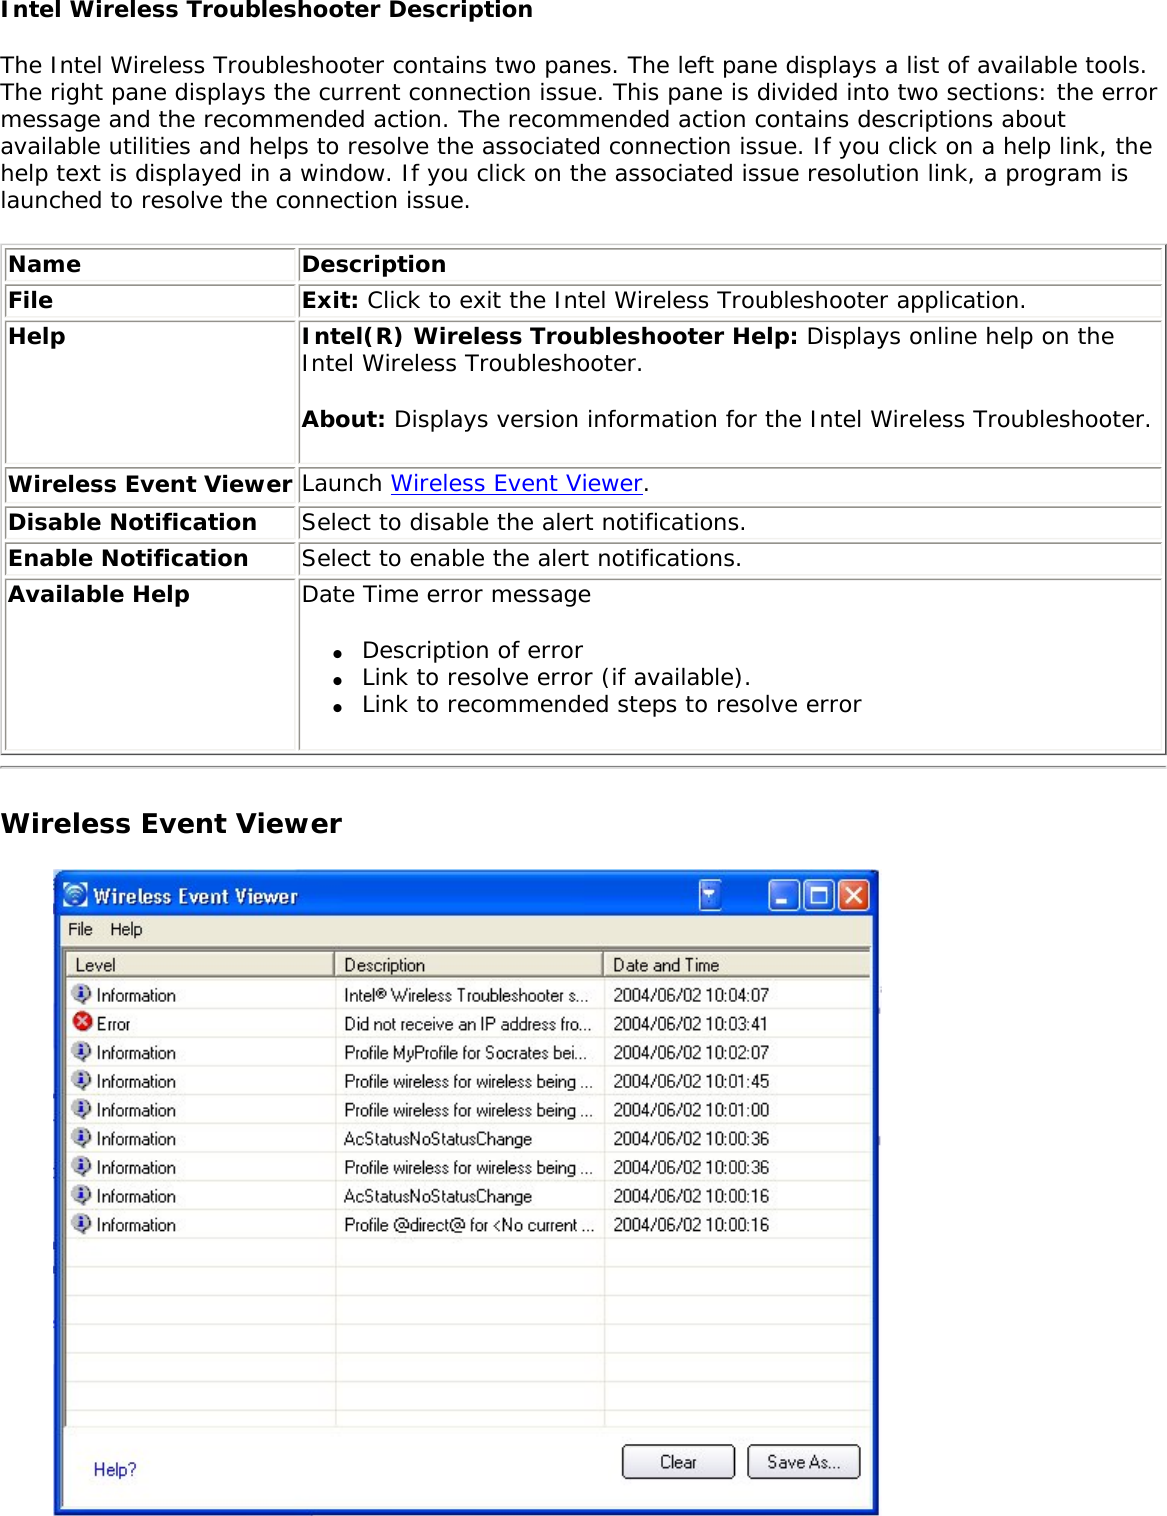 Intel Wireless Troubleshooter DescriptionThe Intel Wireless Troubleshooter contains two panes. The left pane displays a list of available tools. The right pane displays the current connection issue. This pane is divided into two sections: the error message and the recommended action. The recommended action contains descriptions about available utilities and helps to resolve the associated connection issue. If you click on a help link, the help text is displayed in a window. If you click on the associated issue resolution link, a program is launched to resolve the connection issue. Name DescriptionFile Exit: Click to exit the Intel Wireless Troubleshooter application.Help Intel(R) Wireless Troubleshooter Help: Displays online help on the Intel Wireless Troubleshooter.About: Displays version information for the Intel Wireless Troubleshooter.  Wireless Event Viewer Launch Wireless Event Viewer.Disable Notification Select to disable the alert notifications.  Enable Notification Select to enable the alert notifications.Available Help Date Time error message ●     Description of error ●     Link to resolve error (if available). ●     Link to recommended steps to resolve error Wireless Event Viewer 